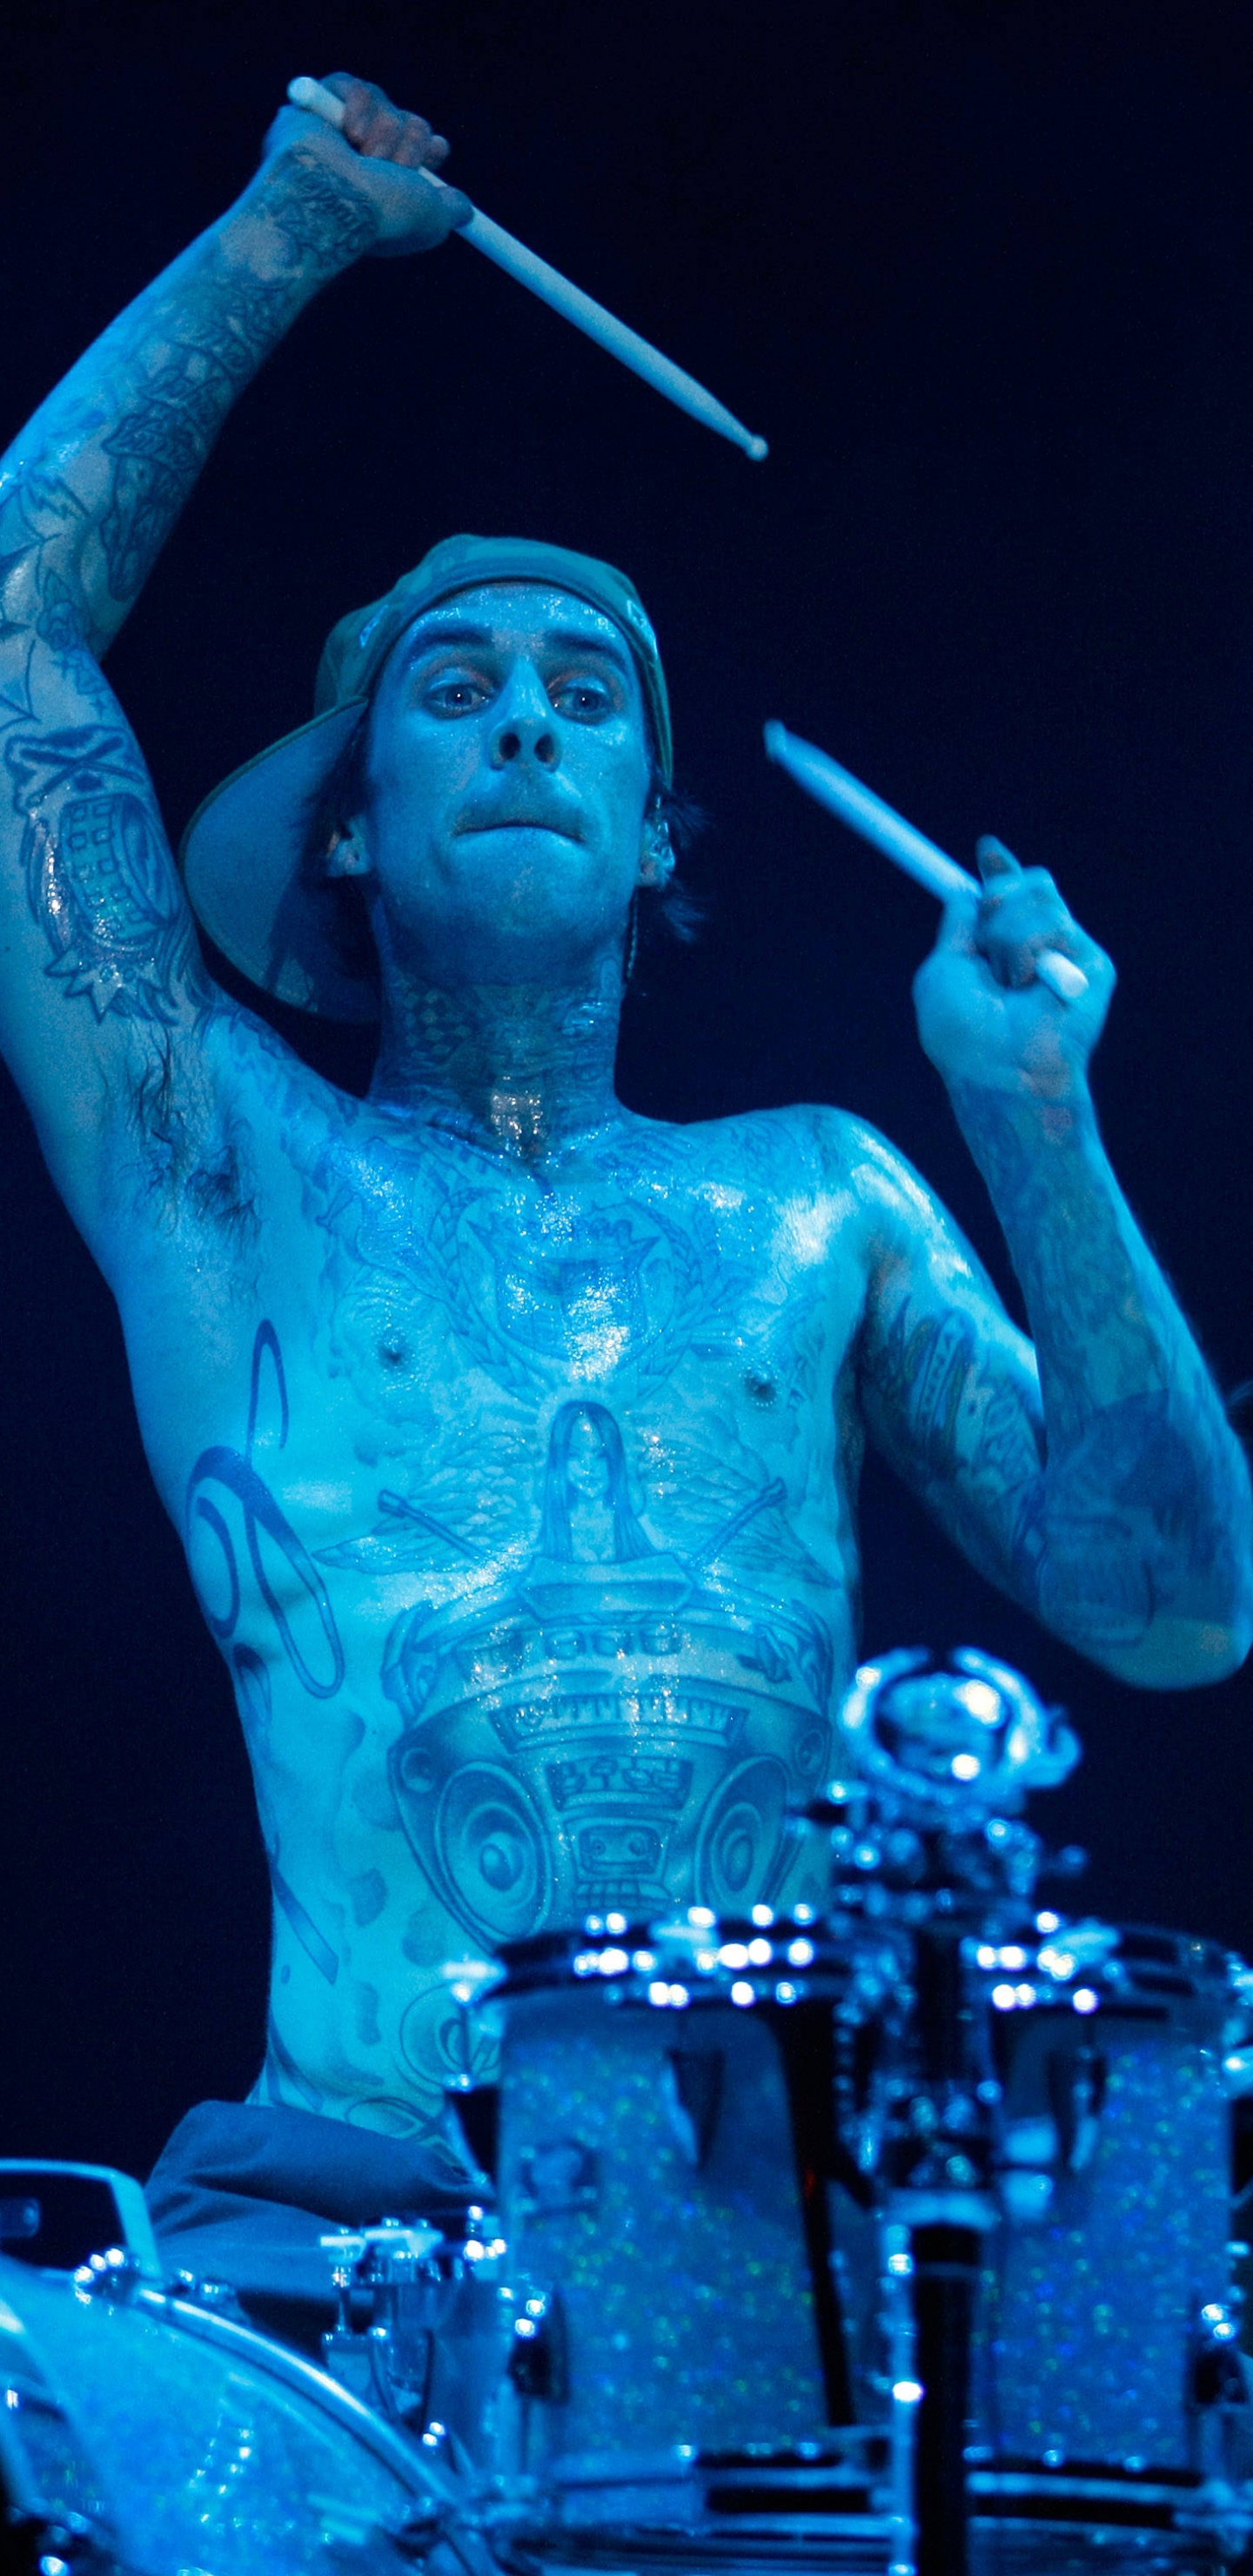 Performance, Performing Arts, Youtube, Electric Blue, Human Body. Wallpaper in 1440x2960 Resolution